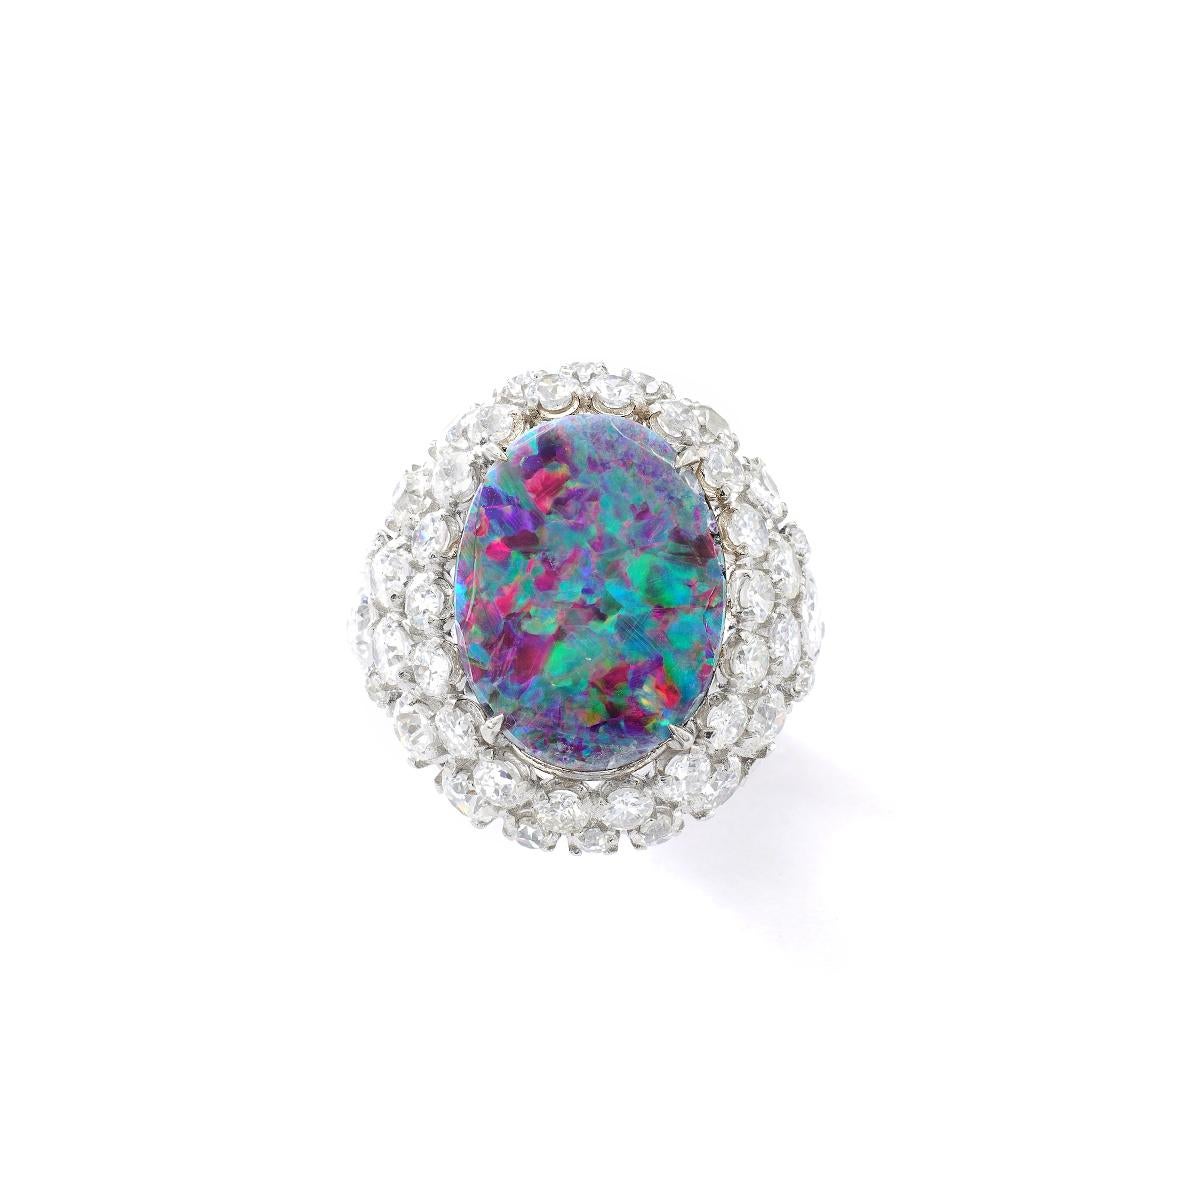 Black Opal doublet surrounded by Diamond on Platinum Ring. Size: 17.00 x 13.00 millimeters.

Total Diamond weight: approximately 4.80-5.00 carats.
Estimated H color, Vs clarity.